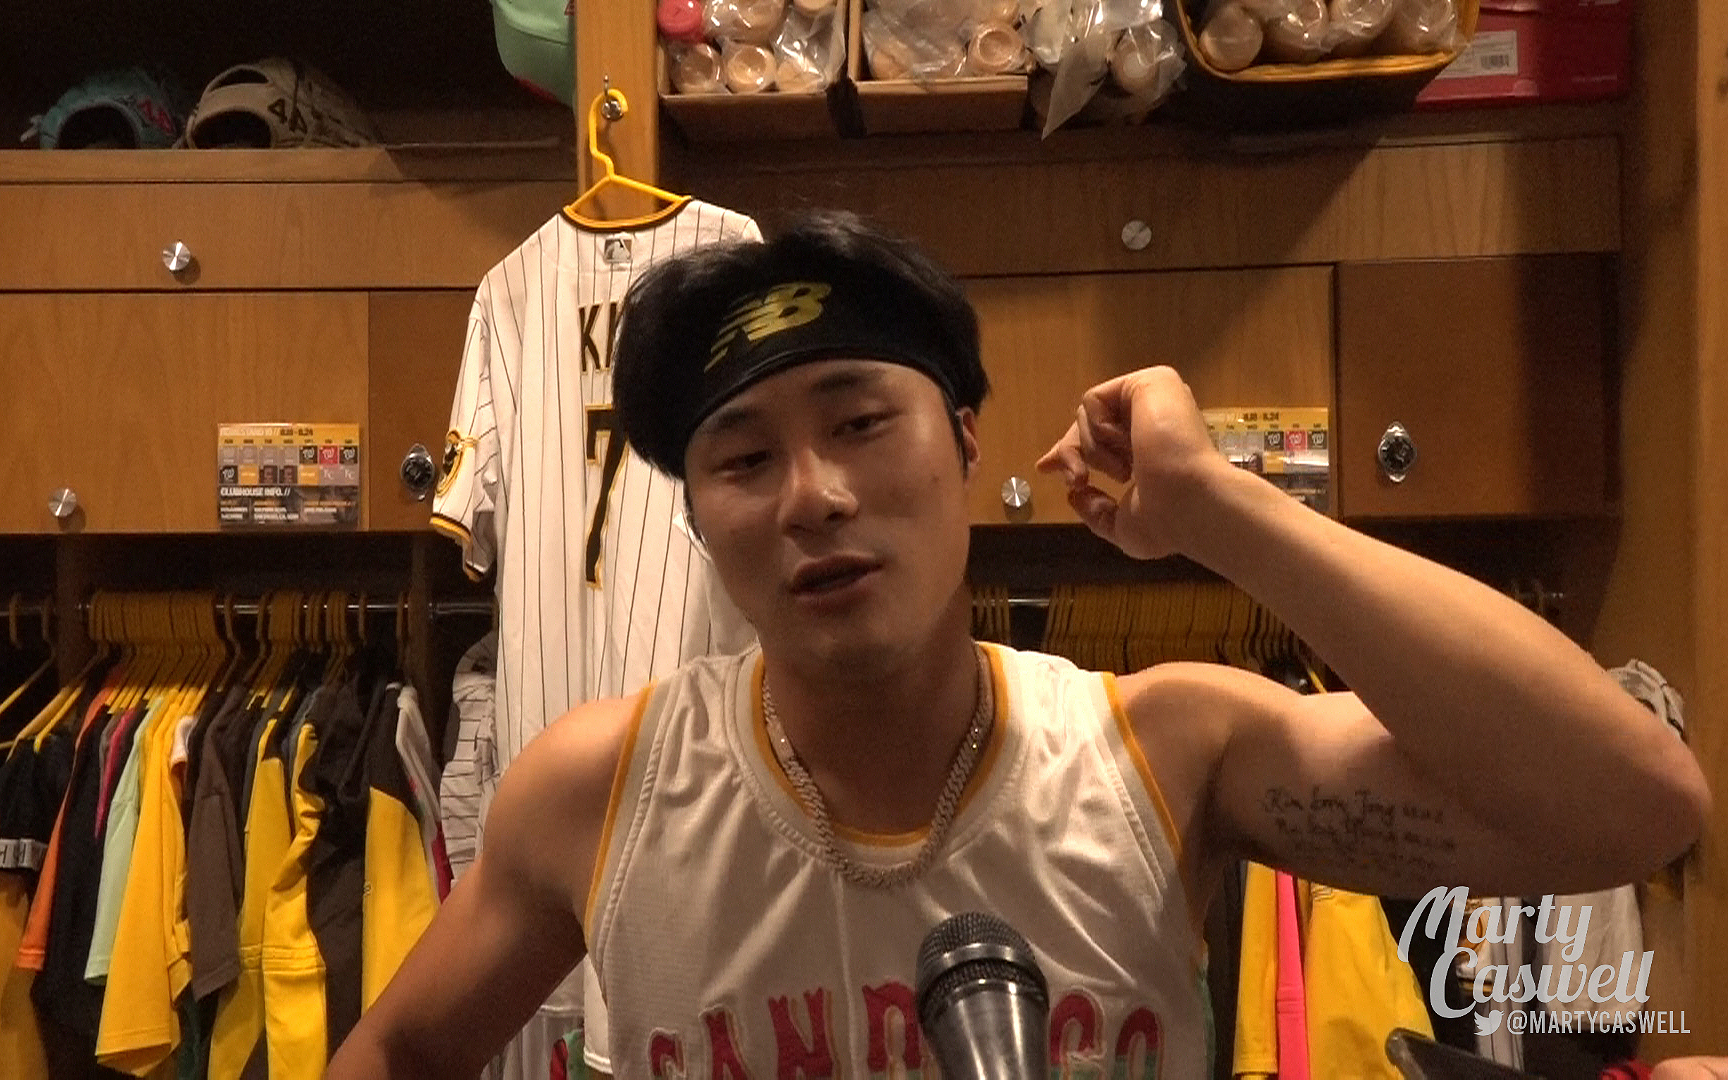 Can Ha-Seong Kim Be the Padres Secret Weapon?